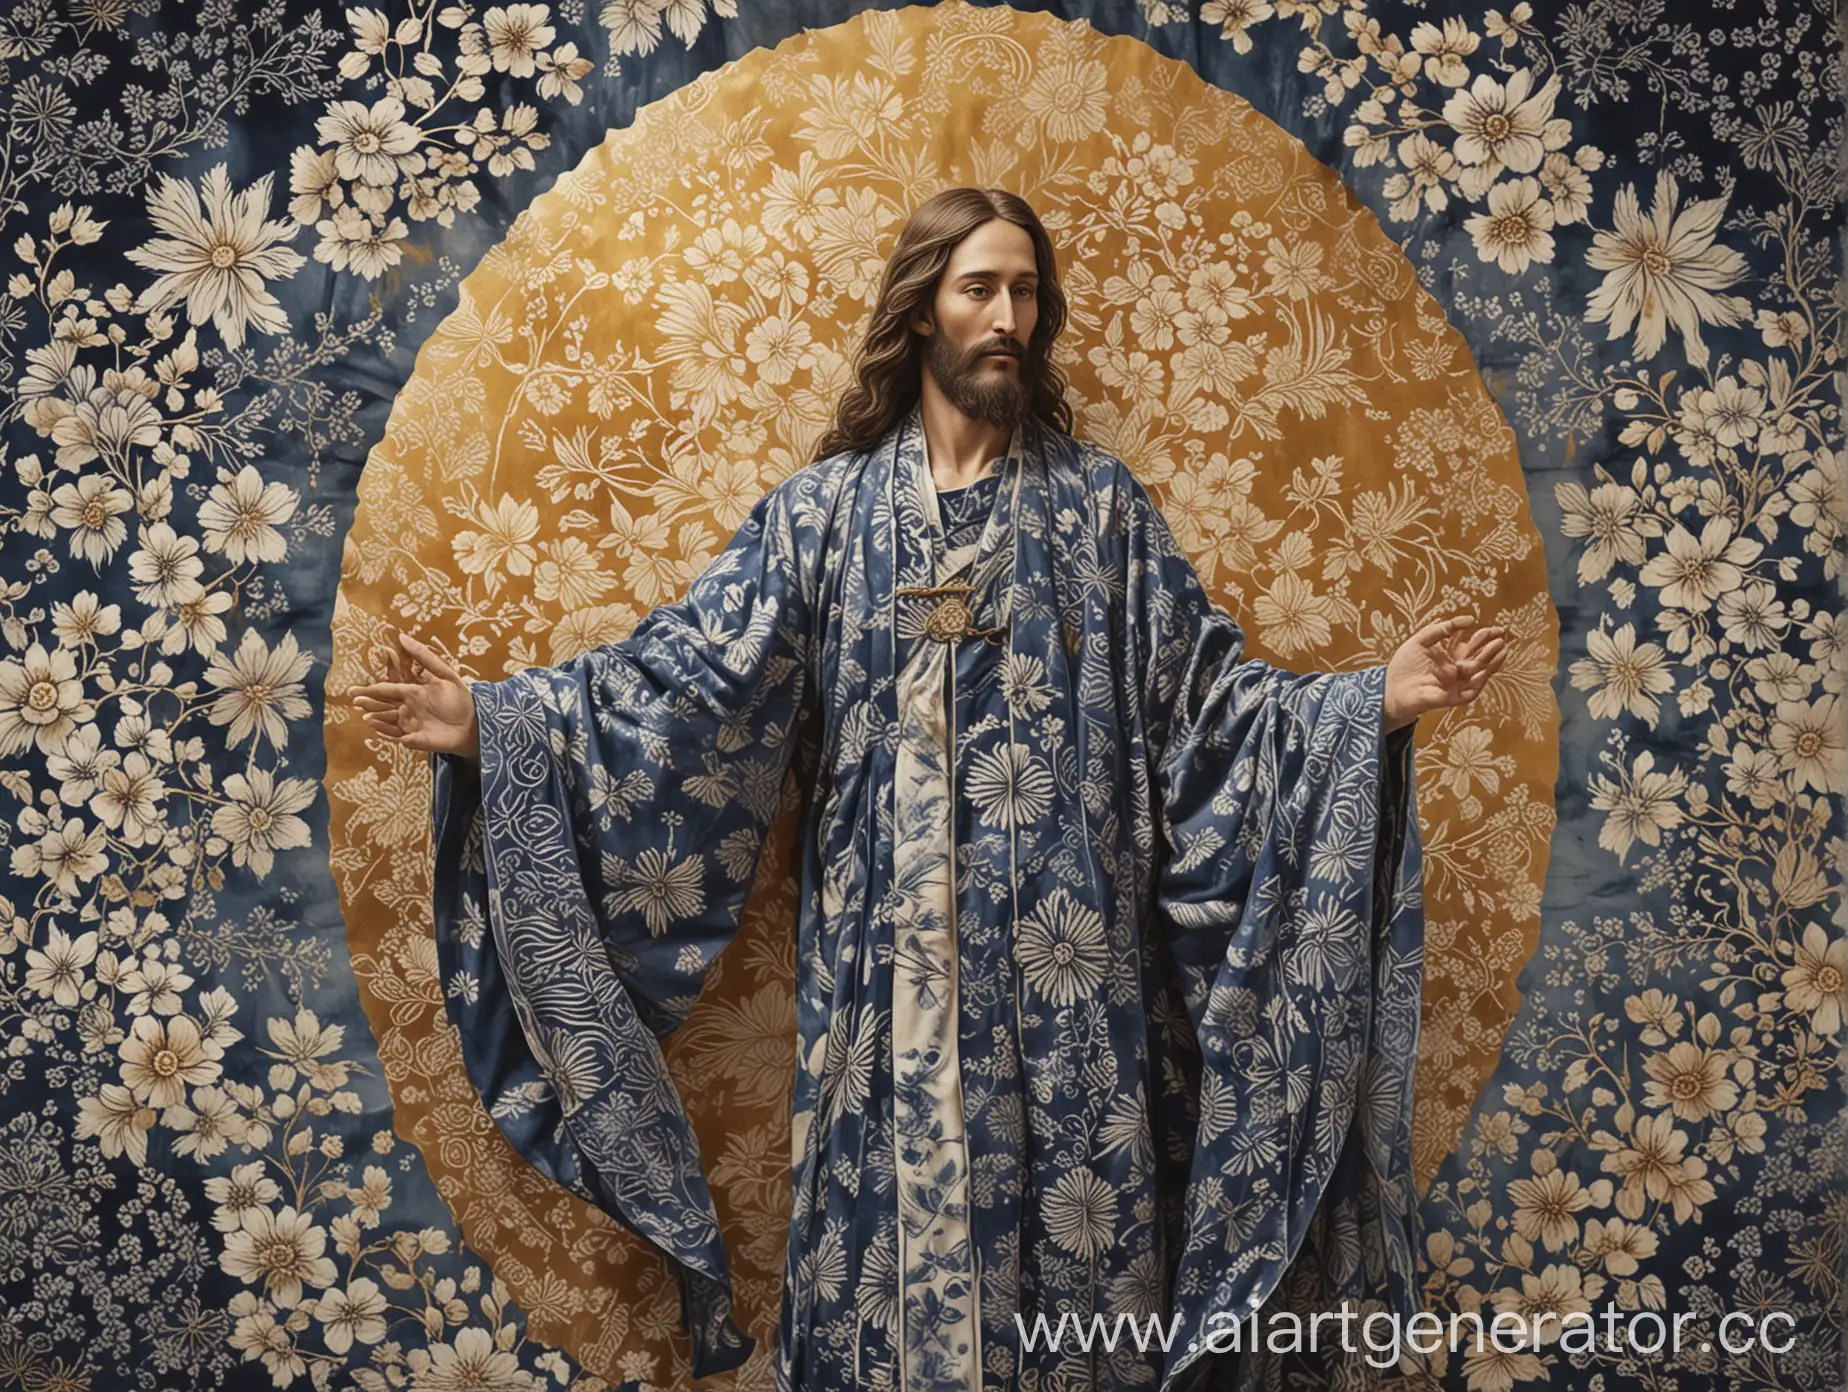 Create an image of Jesus depicted in the Shibori style, incorporating the traditional Japanese tie-dye technique with intricate patterns and vibrant colors. The overall style of the illustration should be inspired by the Palekh school of Russian iconography, characterized by its detailed and ornate design, rich colors, and gold accents. Jesus should be portrayed with a serene expression, traditional robes with intricate Shibori patterns, and a radiant halo. The background should feature elements typical of Palekh art, such as elaborate floral designs and a sense of depth and dimension.